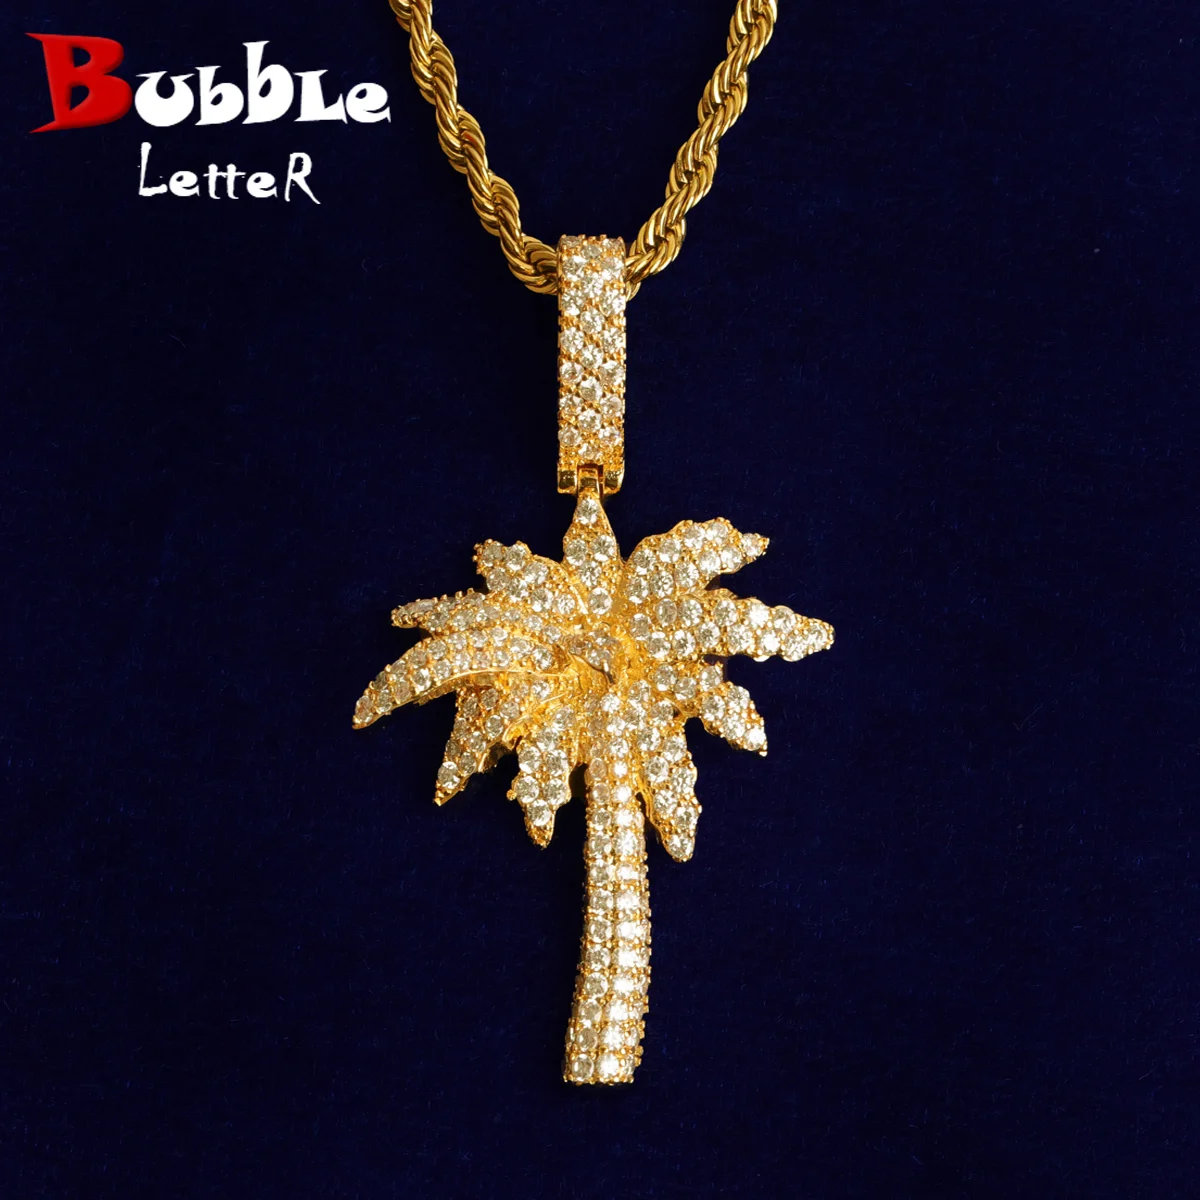 Bubble Letter Palm Tree Necklace for Men Iced Out Pendant Bling Real Gold Plated Hip Hop Fashion Jewelry